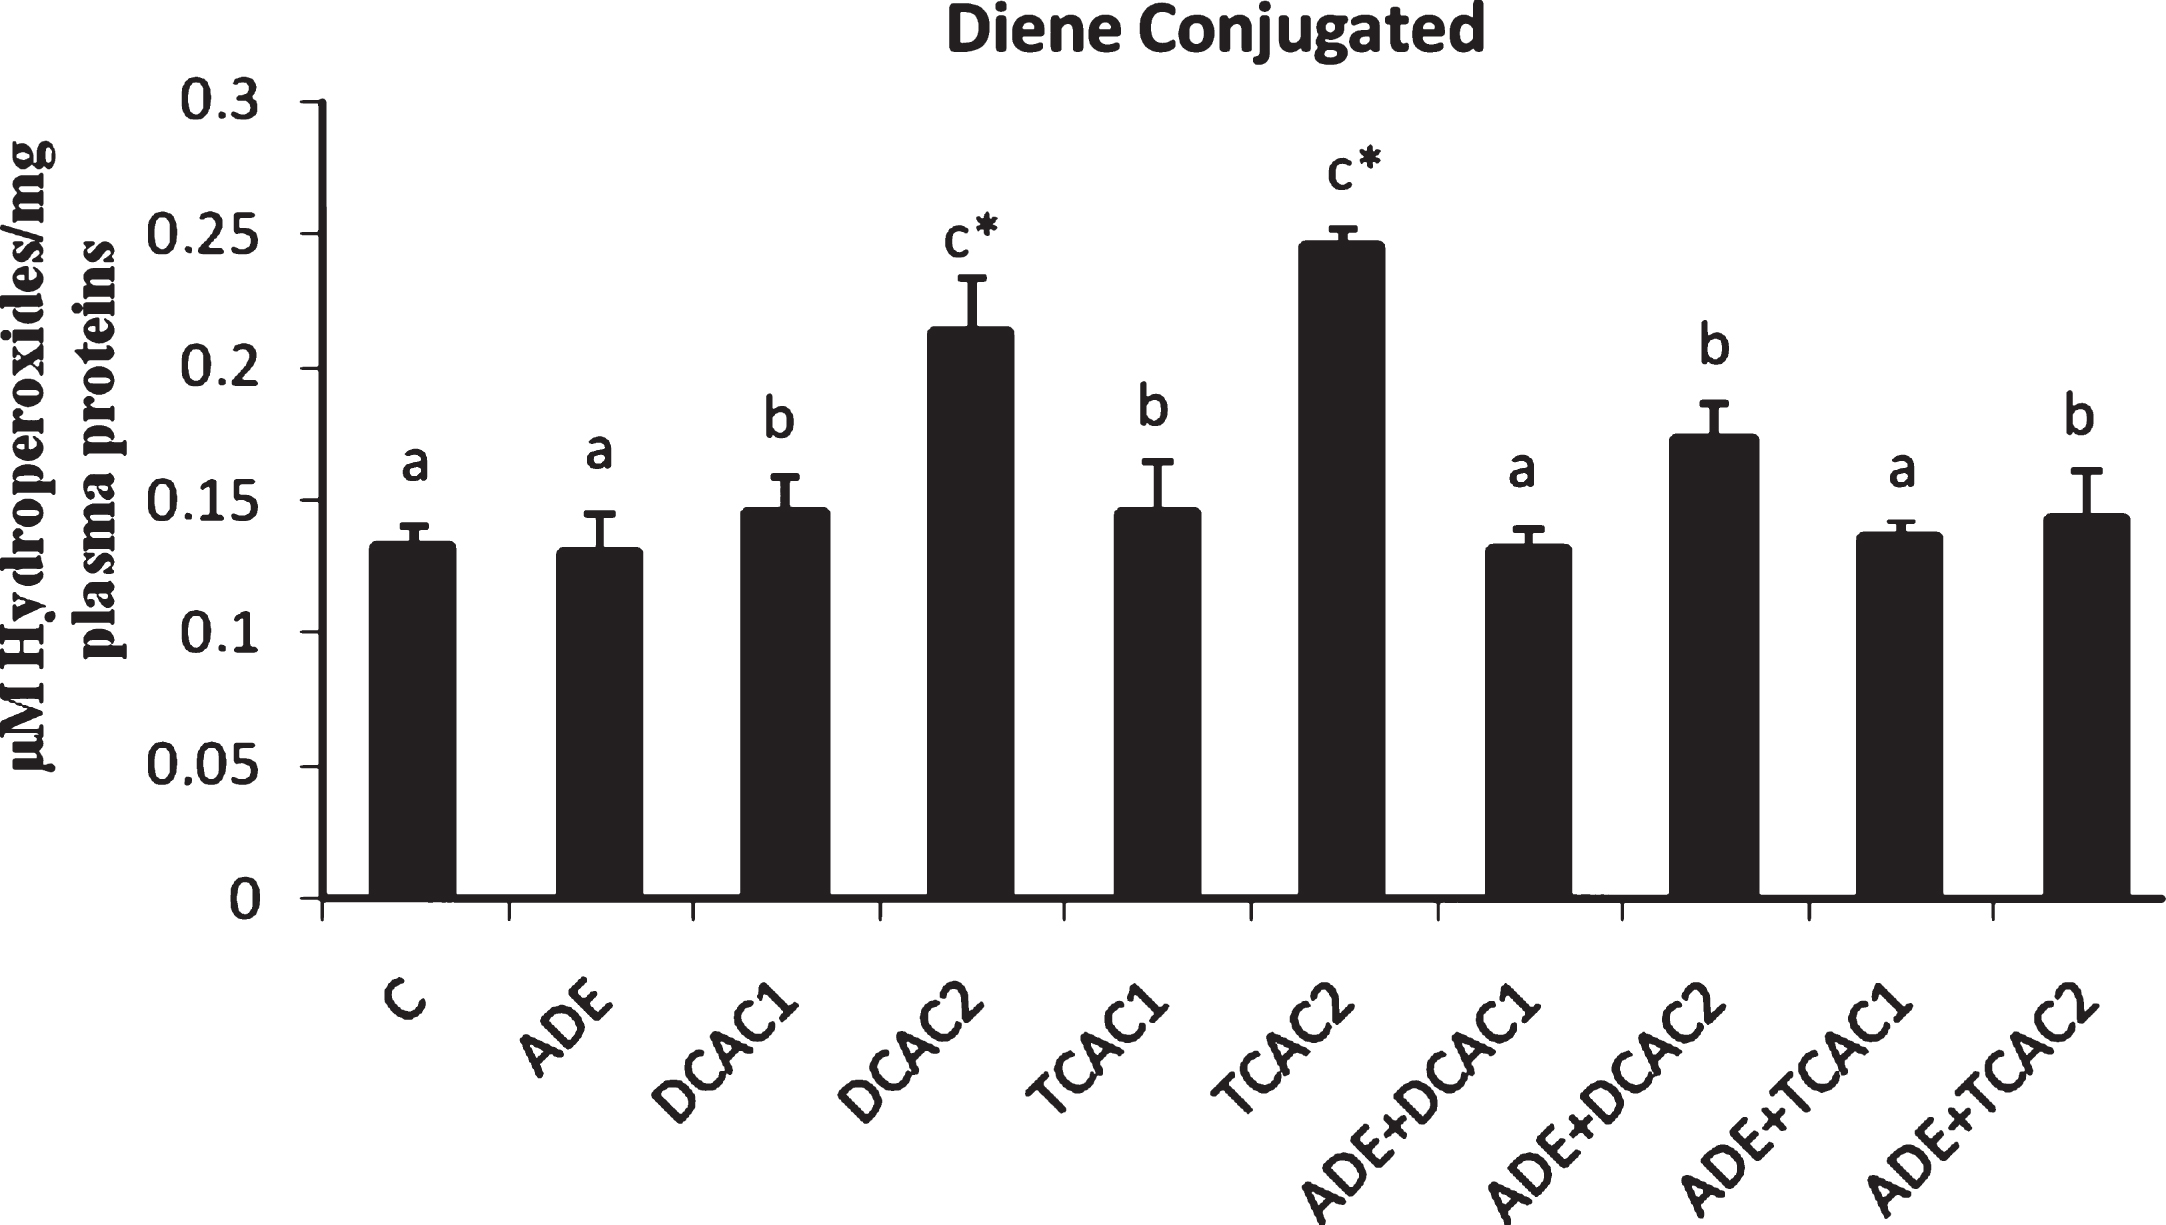 Effect of aqueous date extract on the plasma diene conjugated levels of rats treated with DCA and TCA at 0.5 or 2 g/L. Data are reported as the mean±SD of eight animals in each group. Bars not sharing a common superscript letter (a–c) differ significantly at p < 0.05. C, control; ADE, aqueous date extract; DCAC1, dichloroacetic acid at 0.5 g/L; DCAC2, dichloroacetic acid at 2 g/L, TAC1, trichloroacetic acid at 0.5 g/L, TAC2, trichloroacetic acid at 2 g/L. *Significant difference (p < 0.05) compared to control group.